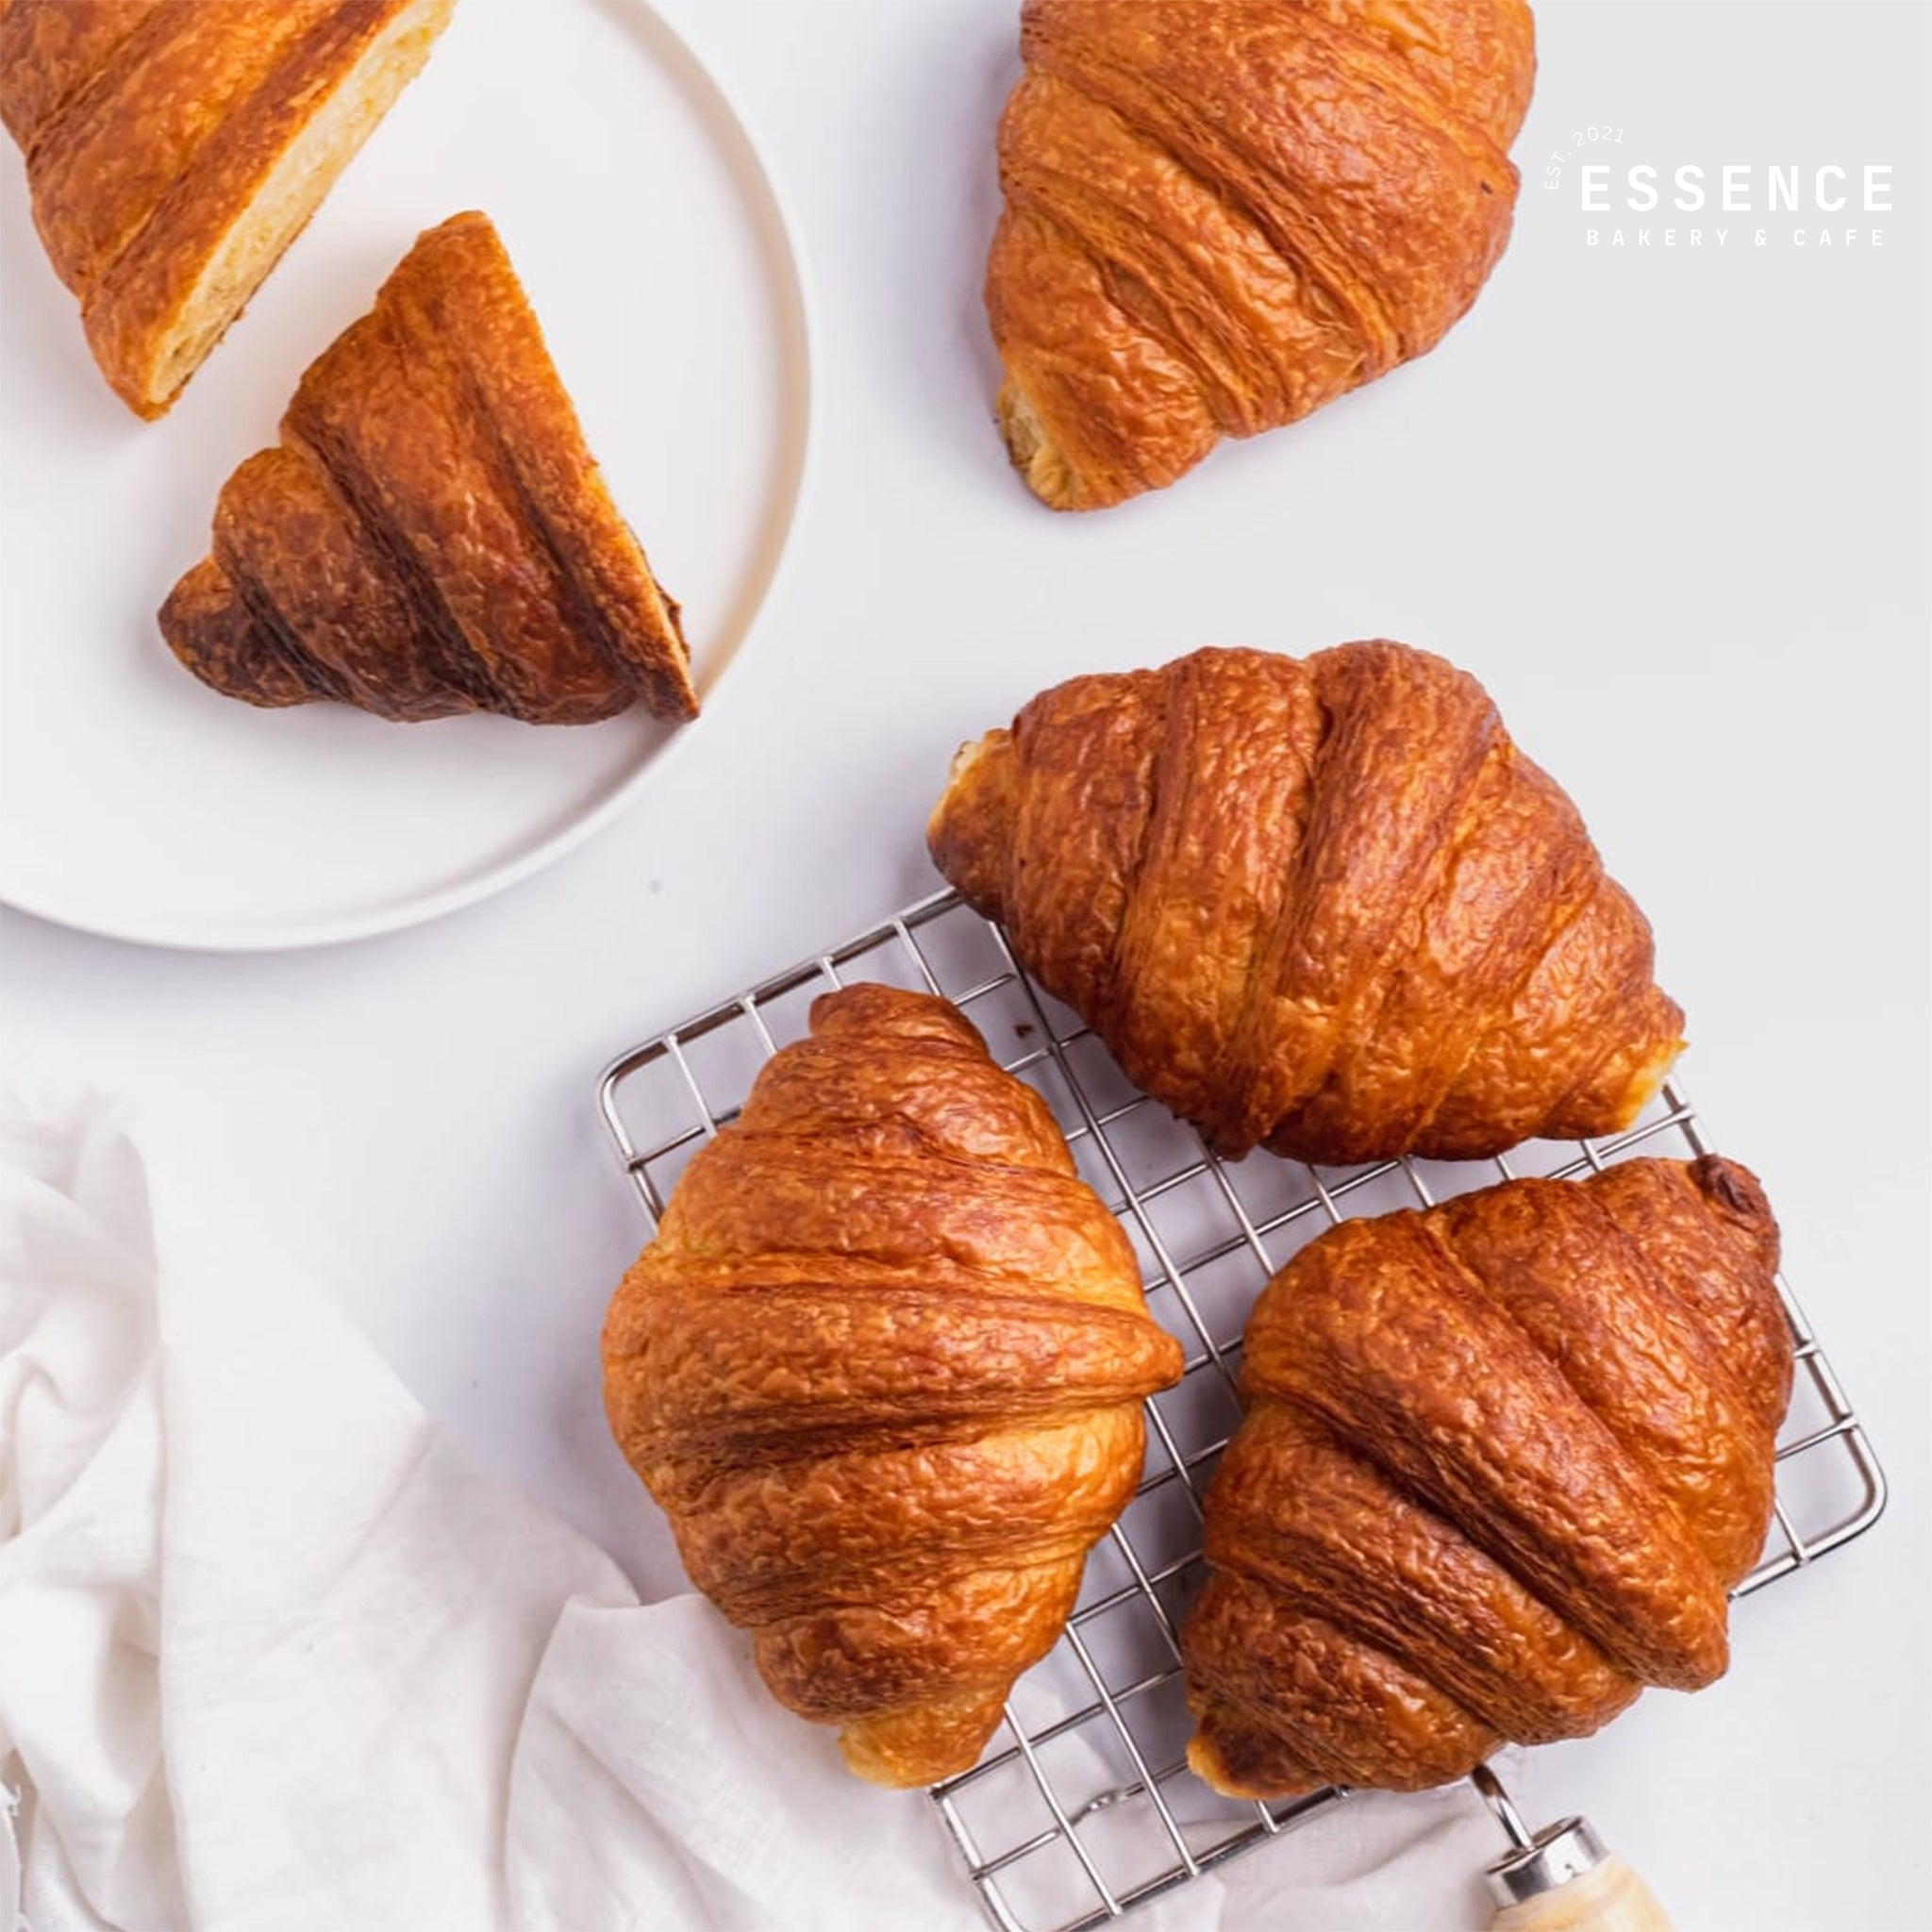 eggless butter croissant by essence bakery & cafe